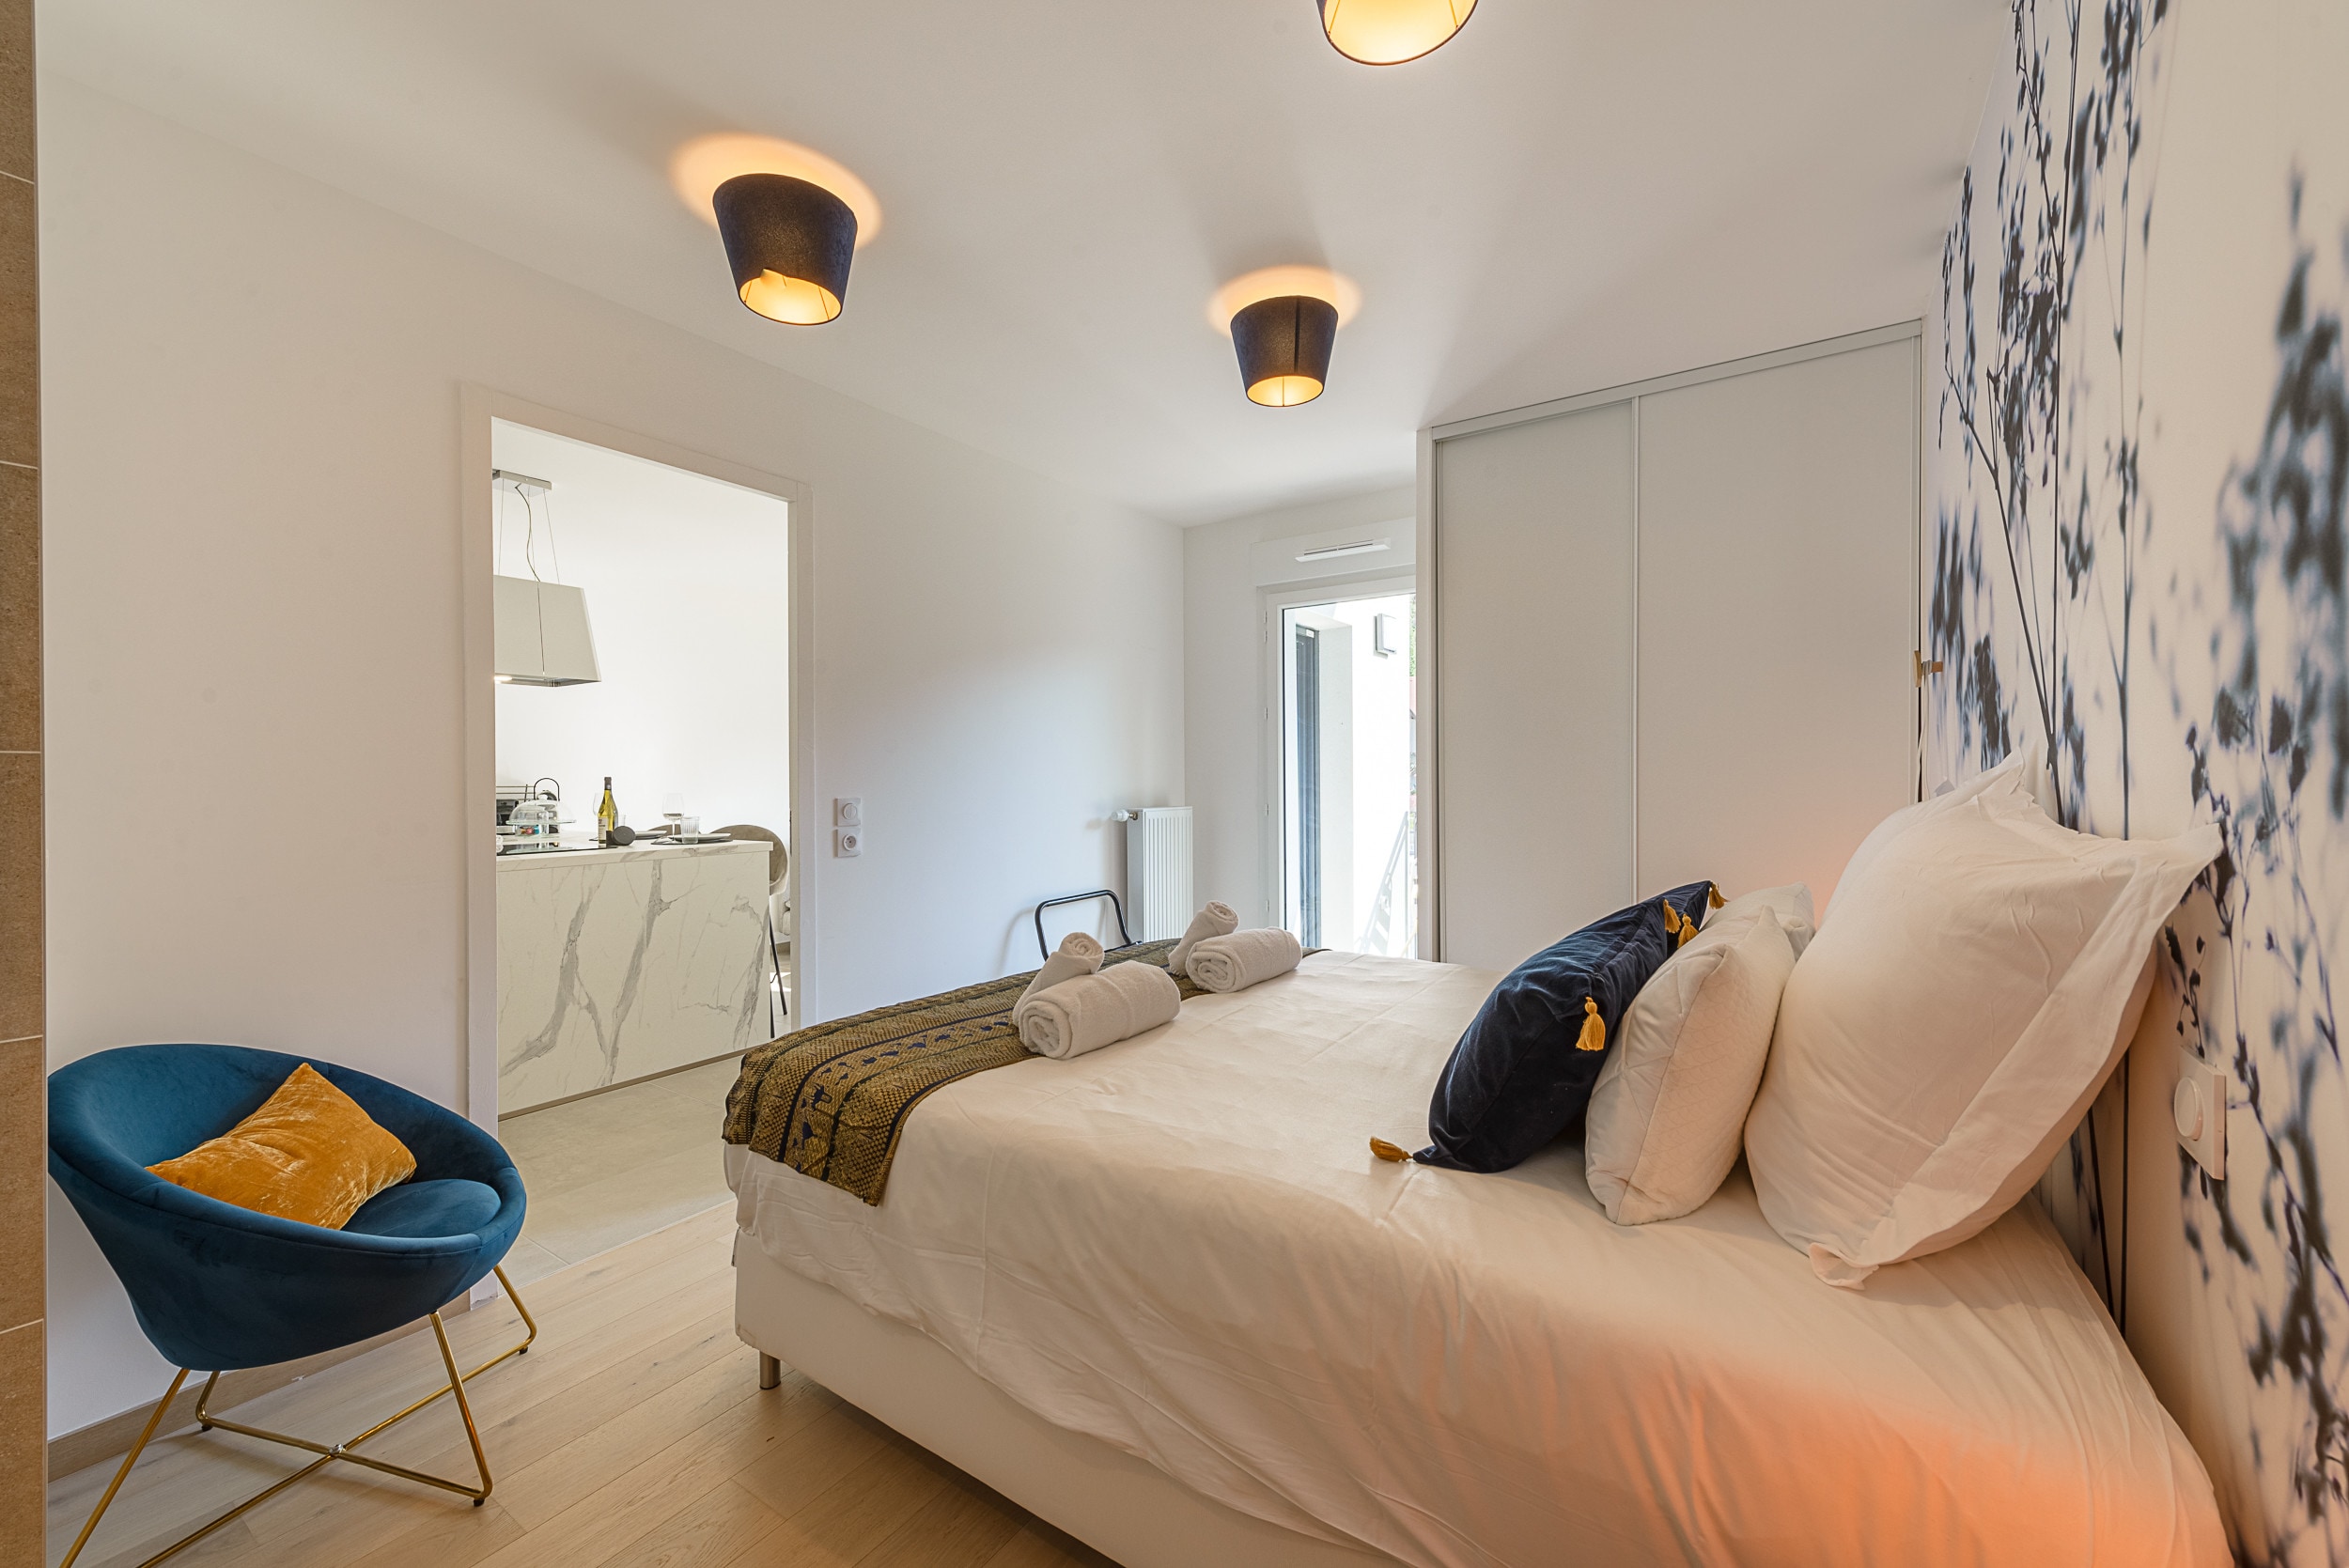 Discover our bedroom with double bed, offering absolute comfort. Take advantage of the large storage cupboards and open shower room with washbasin. Access the balcony for relaxing moments overlooking the surrounding landscape. Book now for an unforgettable getaway in the French Alps!